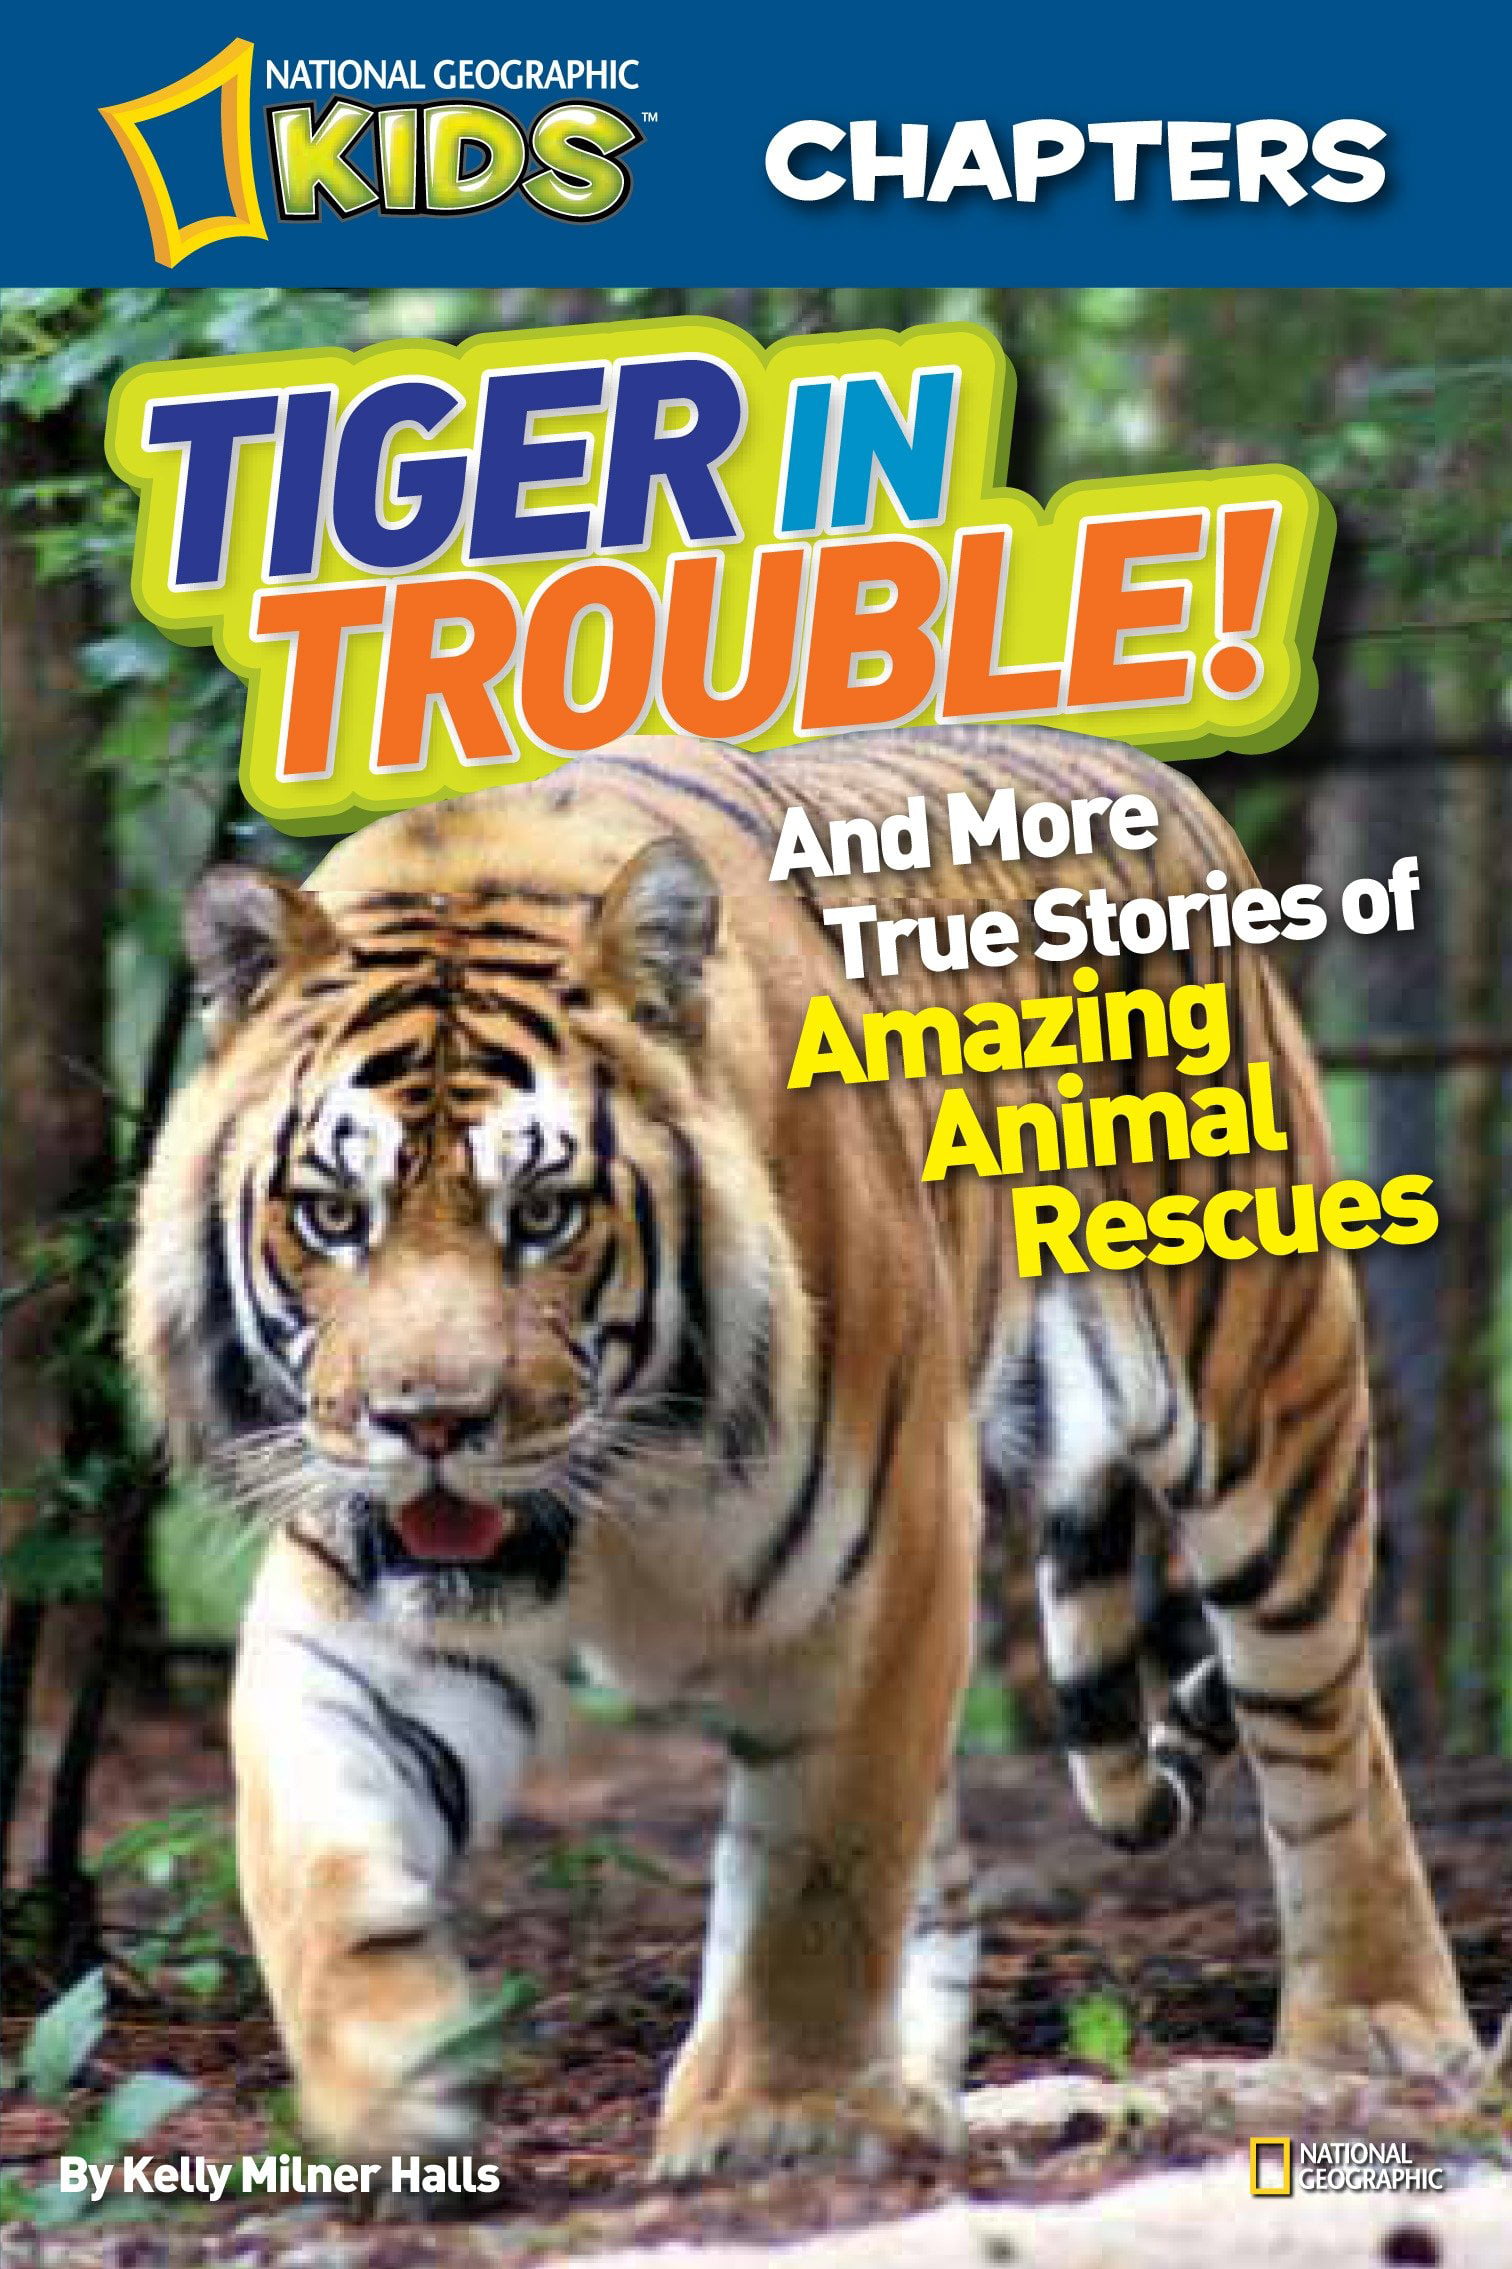 National Geographic Kids Chapters: Tiger in Trouble! : and More True Stories of Amazing Animal Rescues